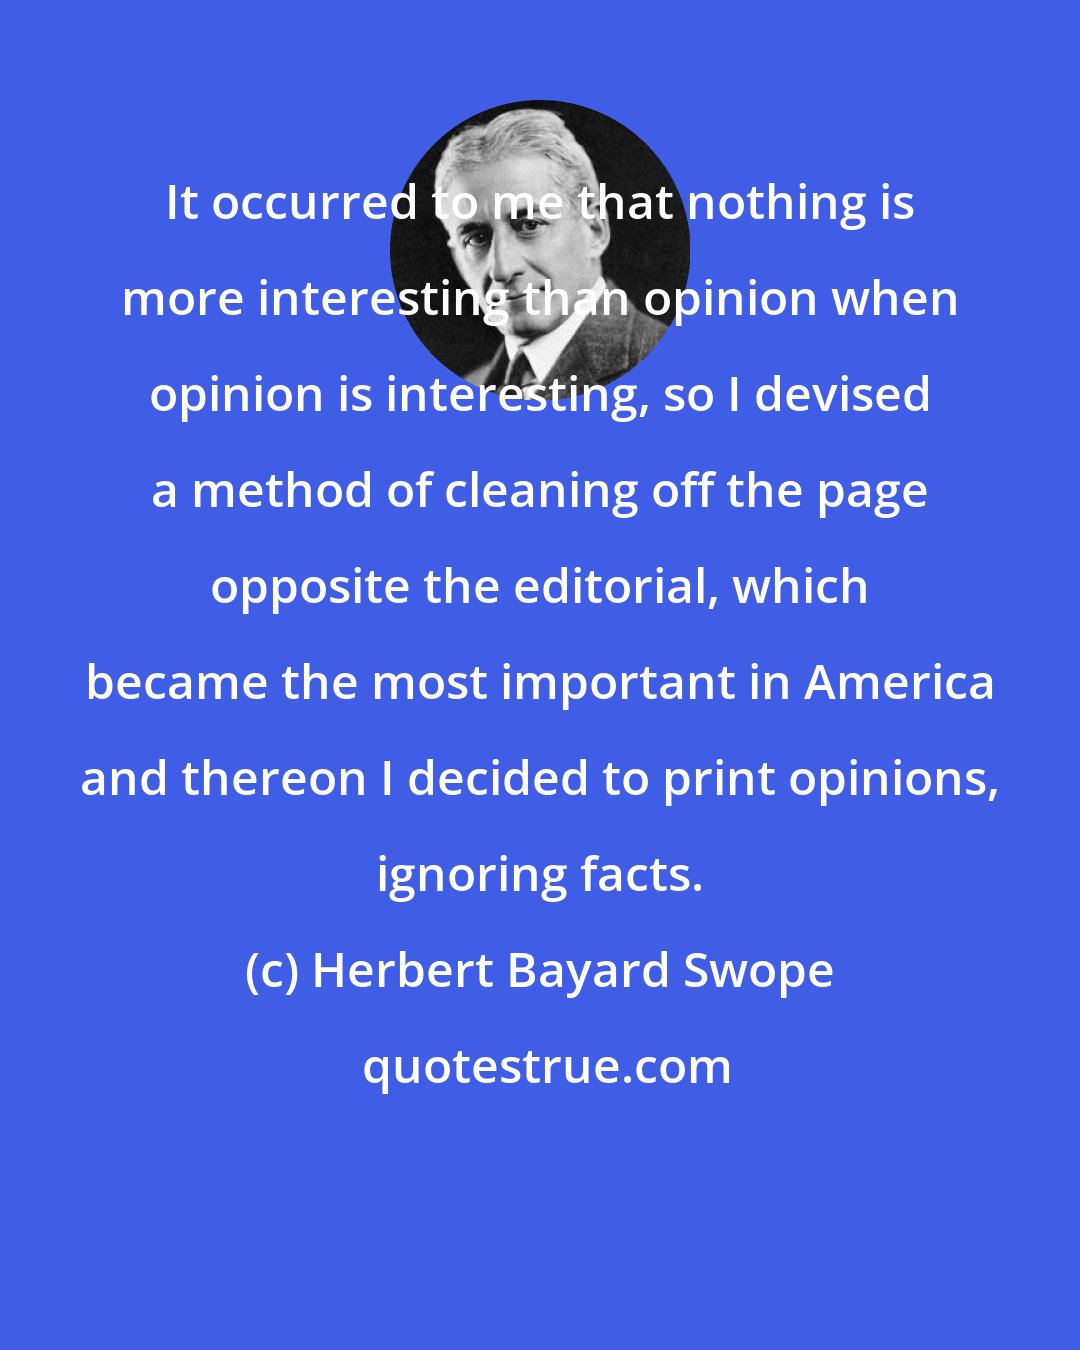 Herbert Bayard Swope: It occurred to me that nothing is more interesting than opinion when opinion is interesting, so I devised a method of cleaning off the page opposite the editorial, which became the most important in America and thereon I decided to print opinions, ignoring facts.